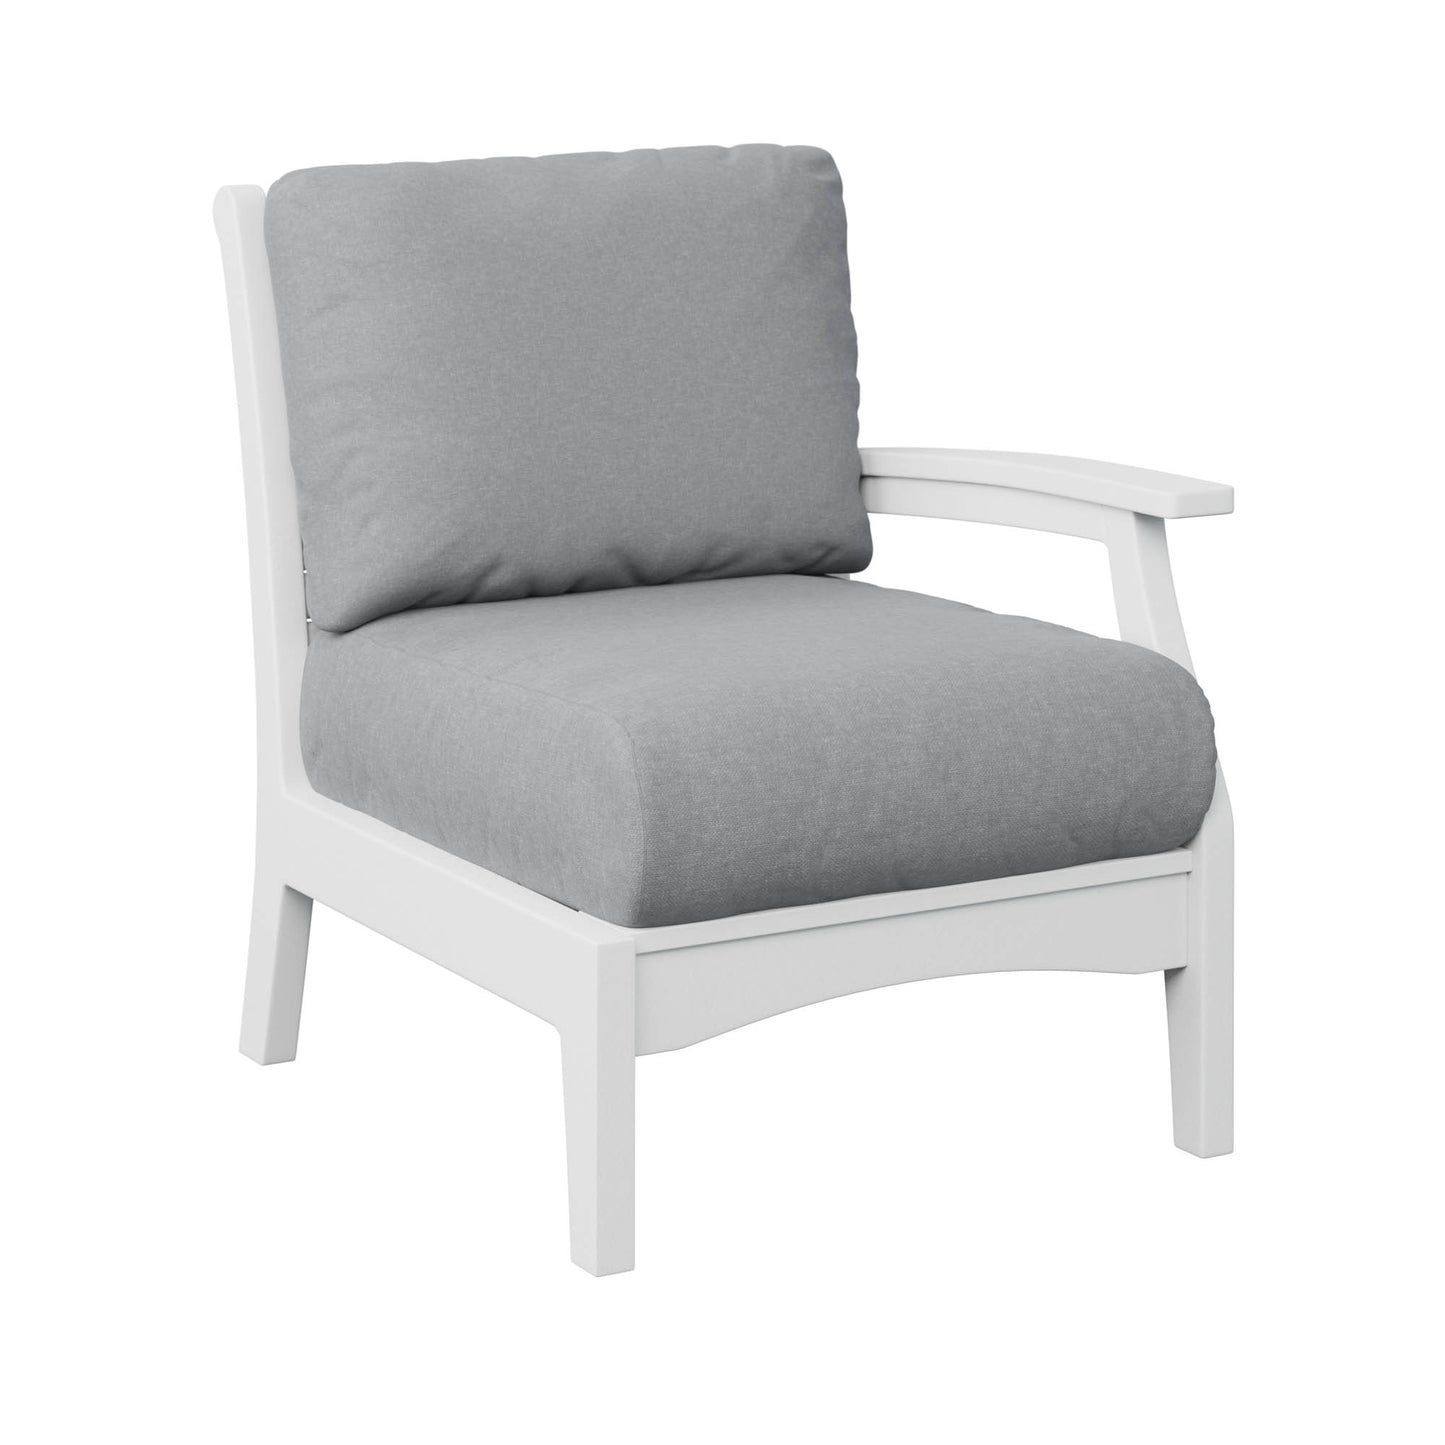 Classic Terrace Left Arm Sectional Club Chair